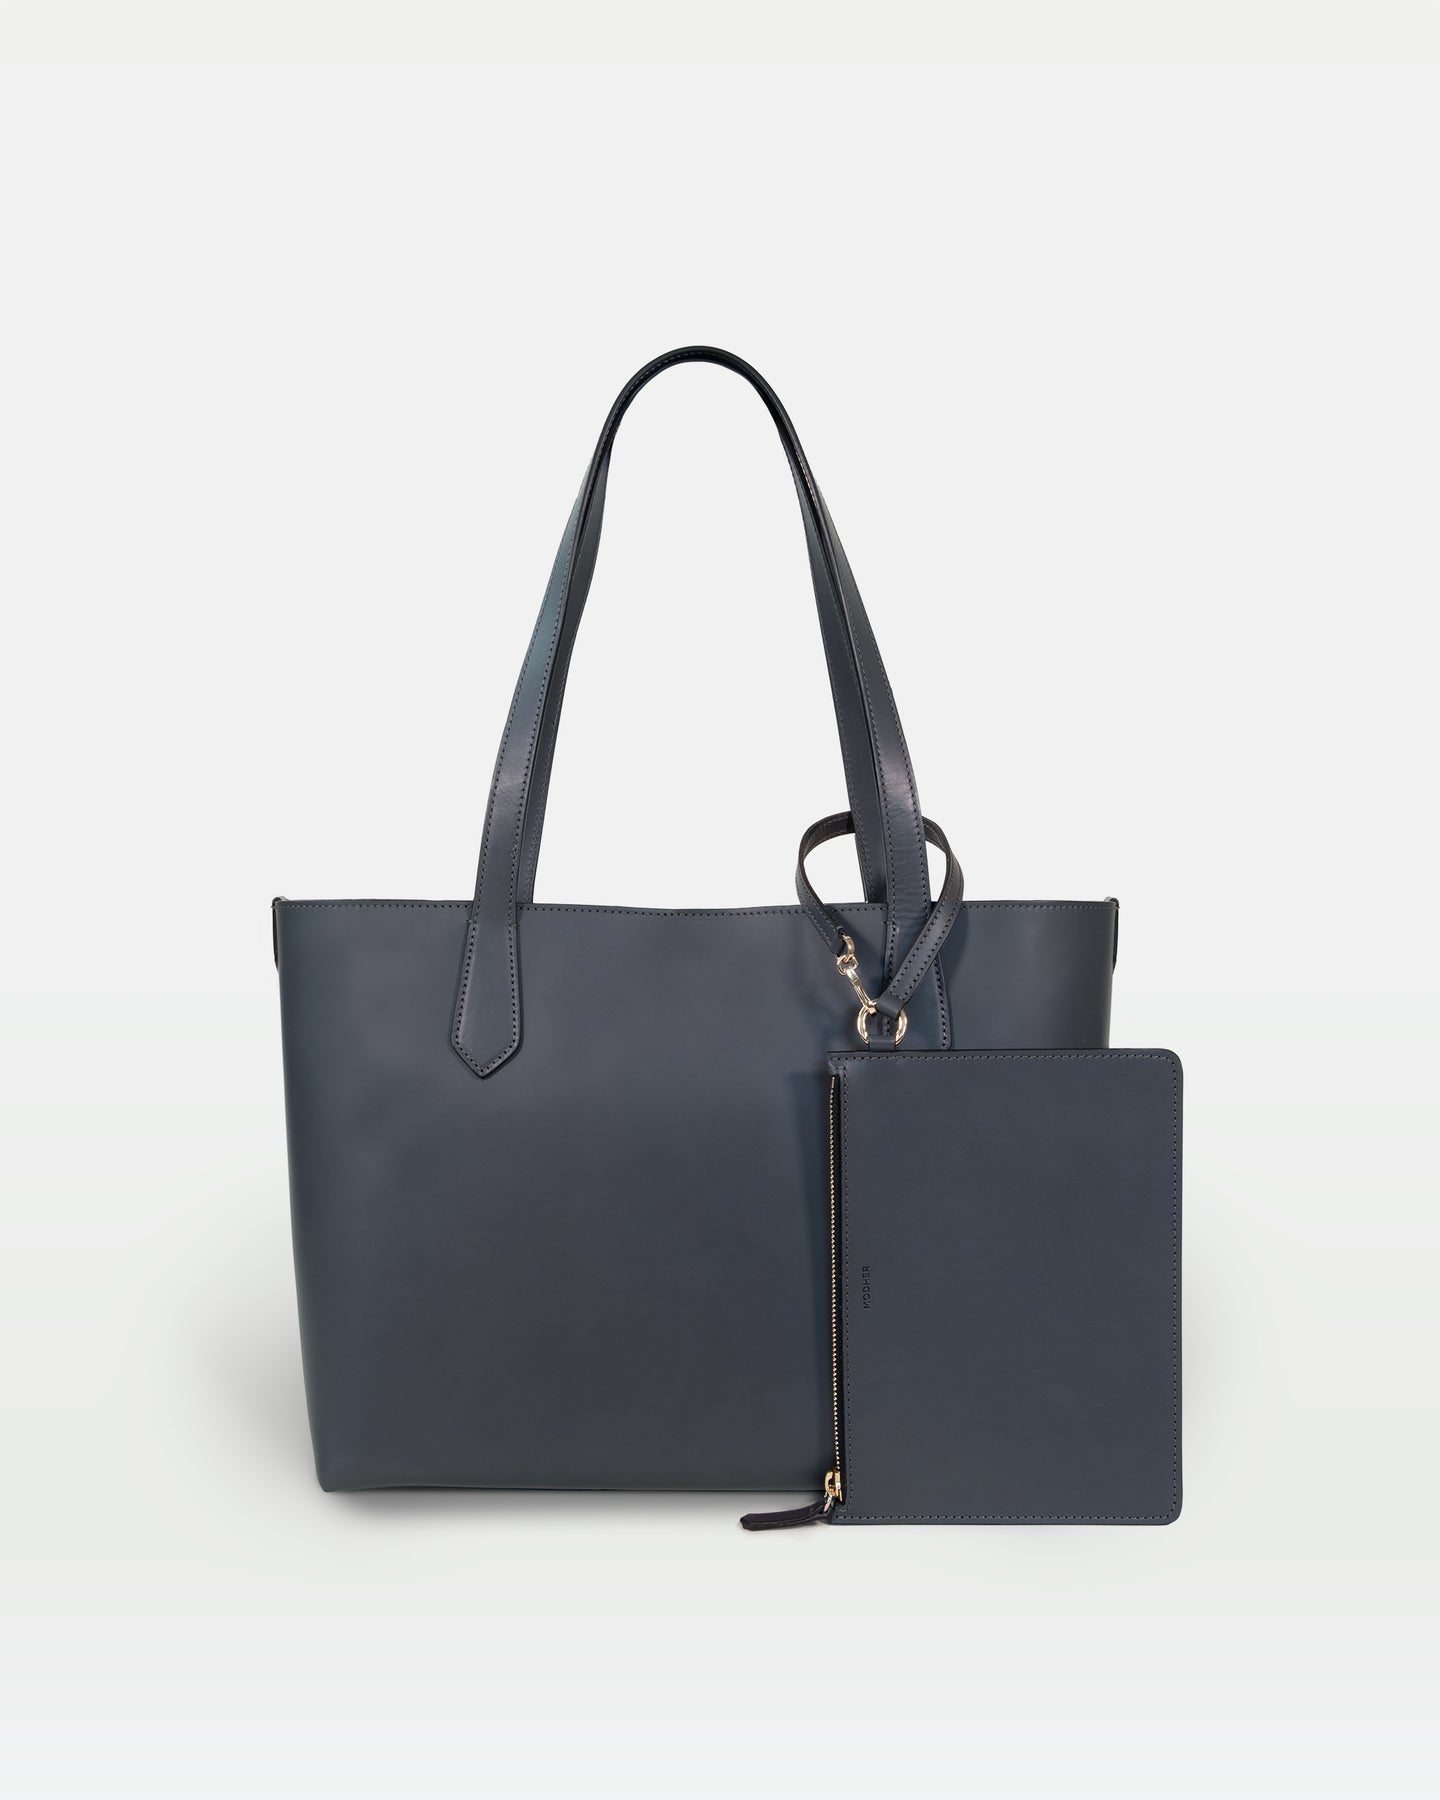 Elba structured tote bag in eco-friendly vegetable-tanned leather. Made ...